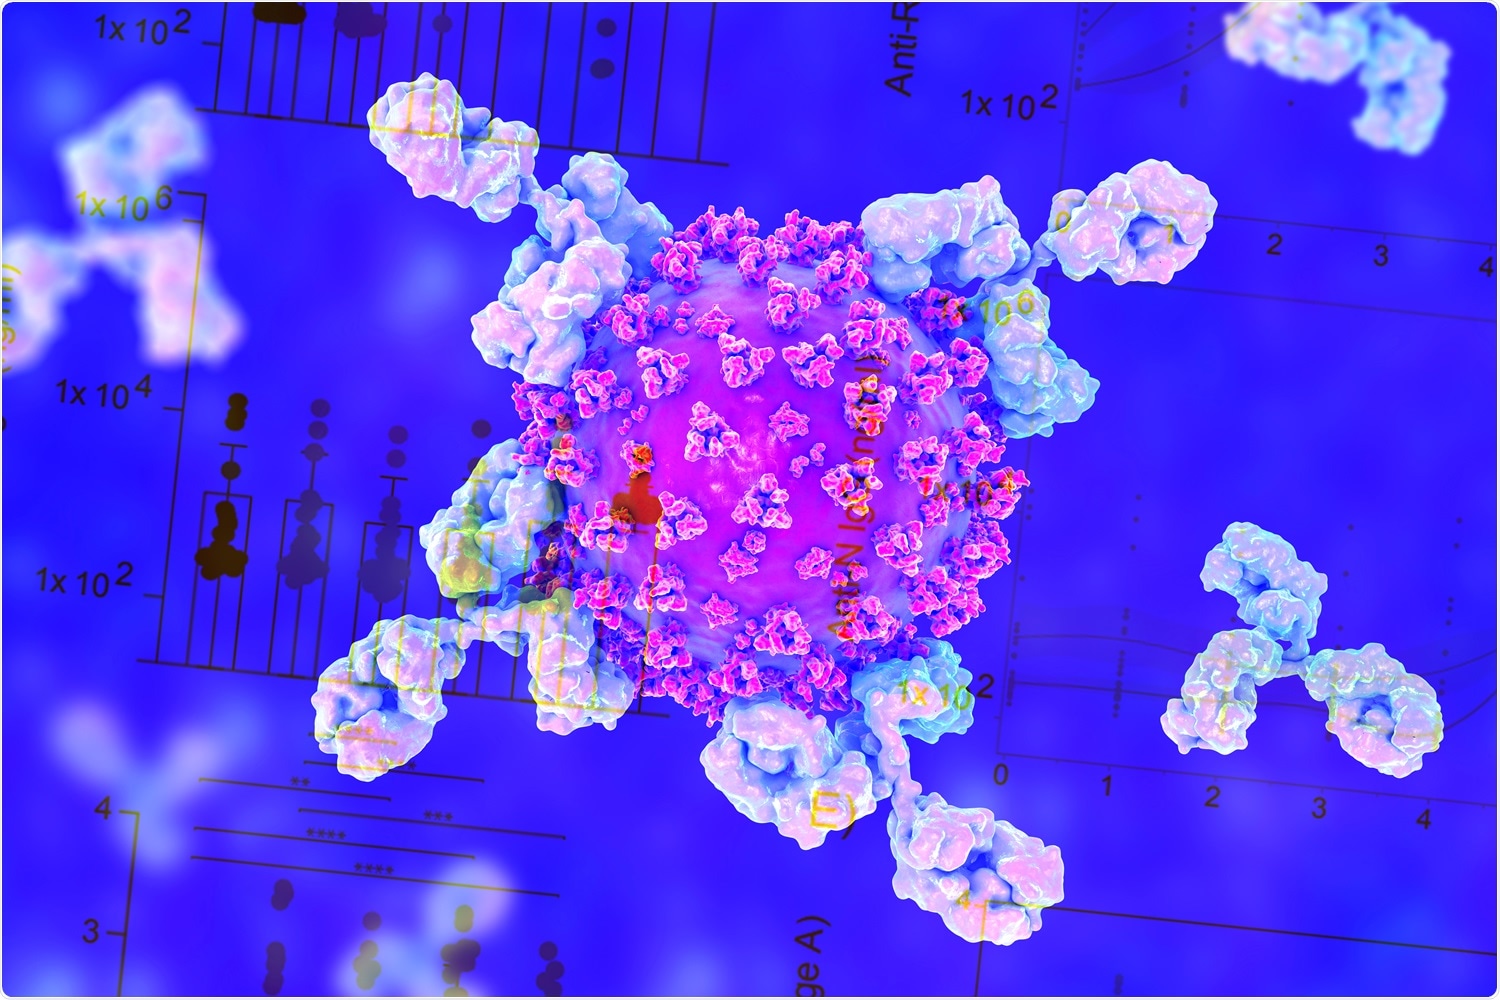 Study: Impact of circulating SARS-CoV-2 variants on mRNA vaccine-induced immunity in uninfected and previously infected individuals. Image Credit: Kateryna Kon / Shutterstock